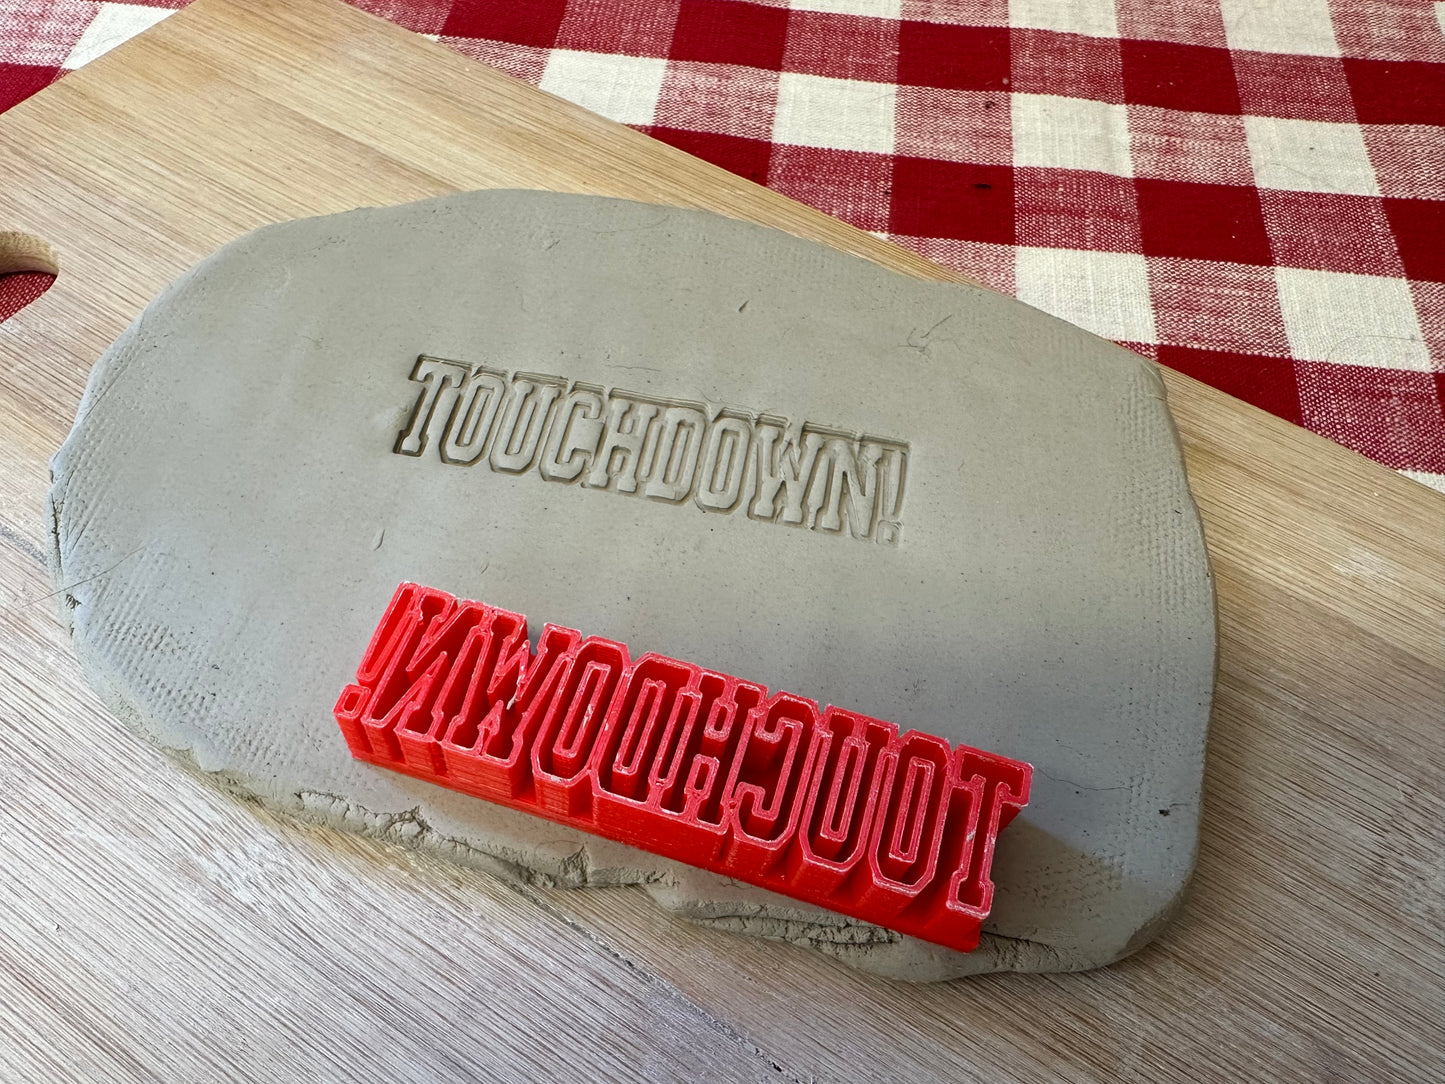 "Touchdown" word stamp - plastic 3D printed, multiple sizes available